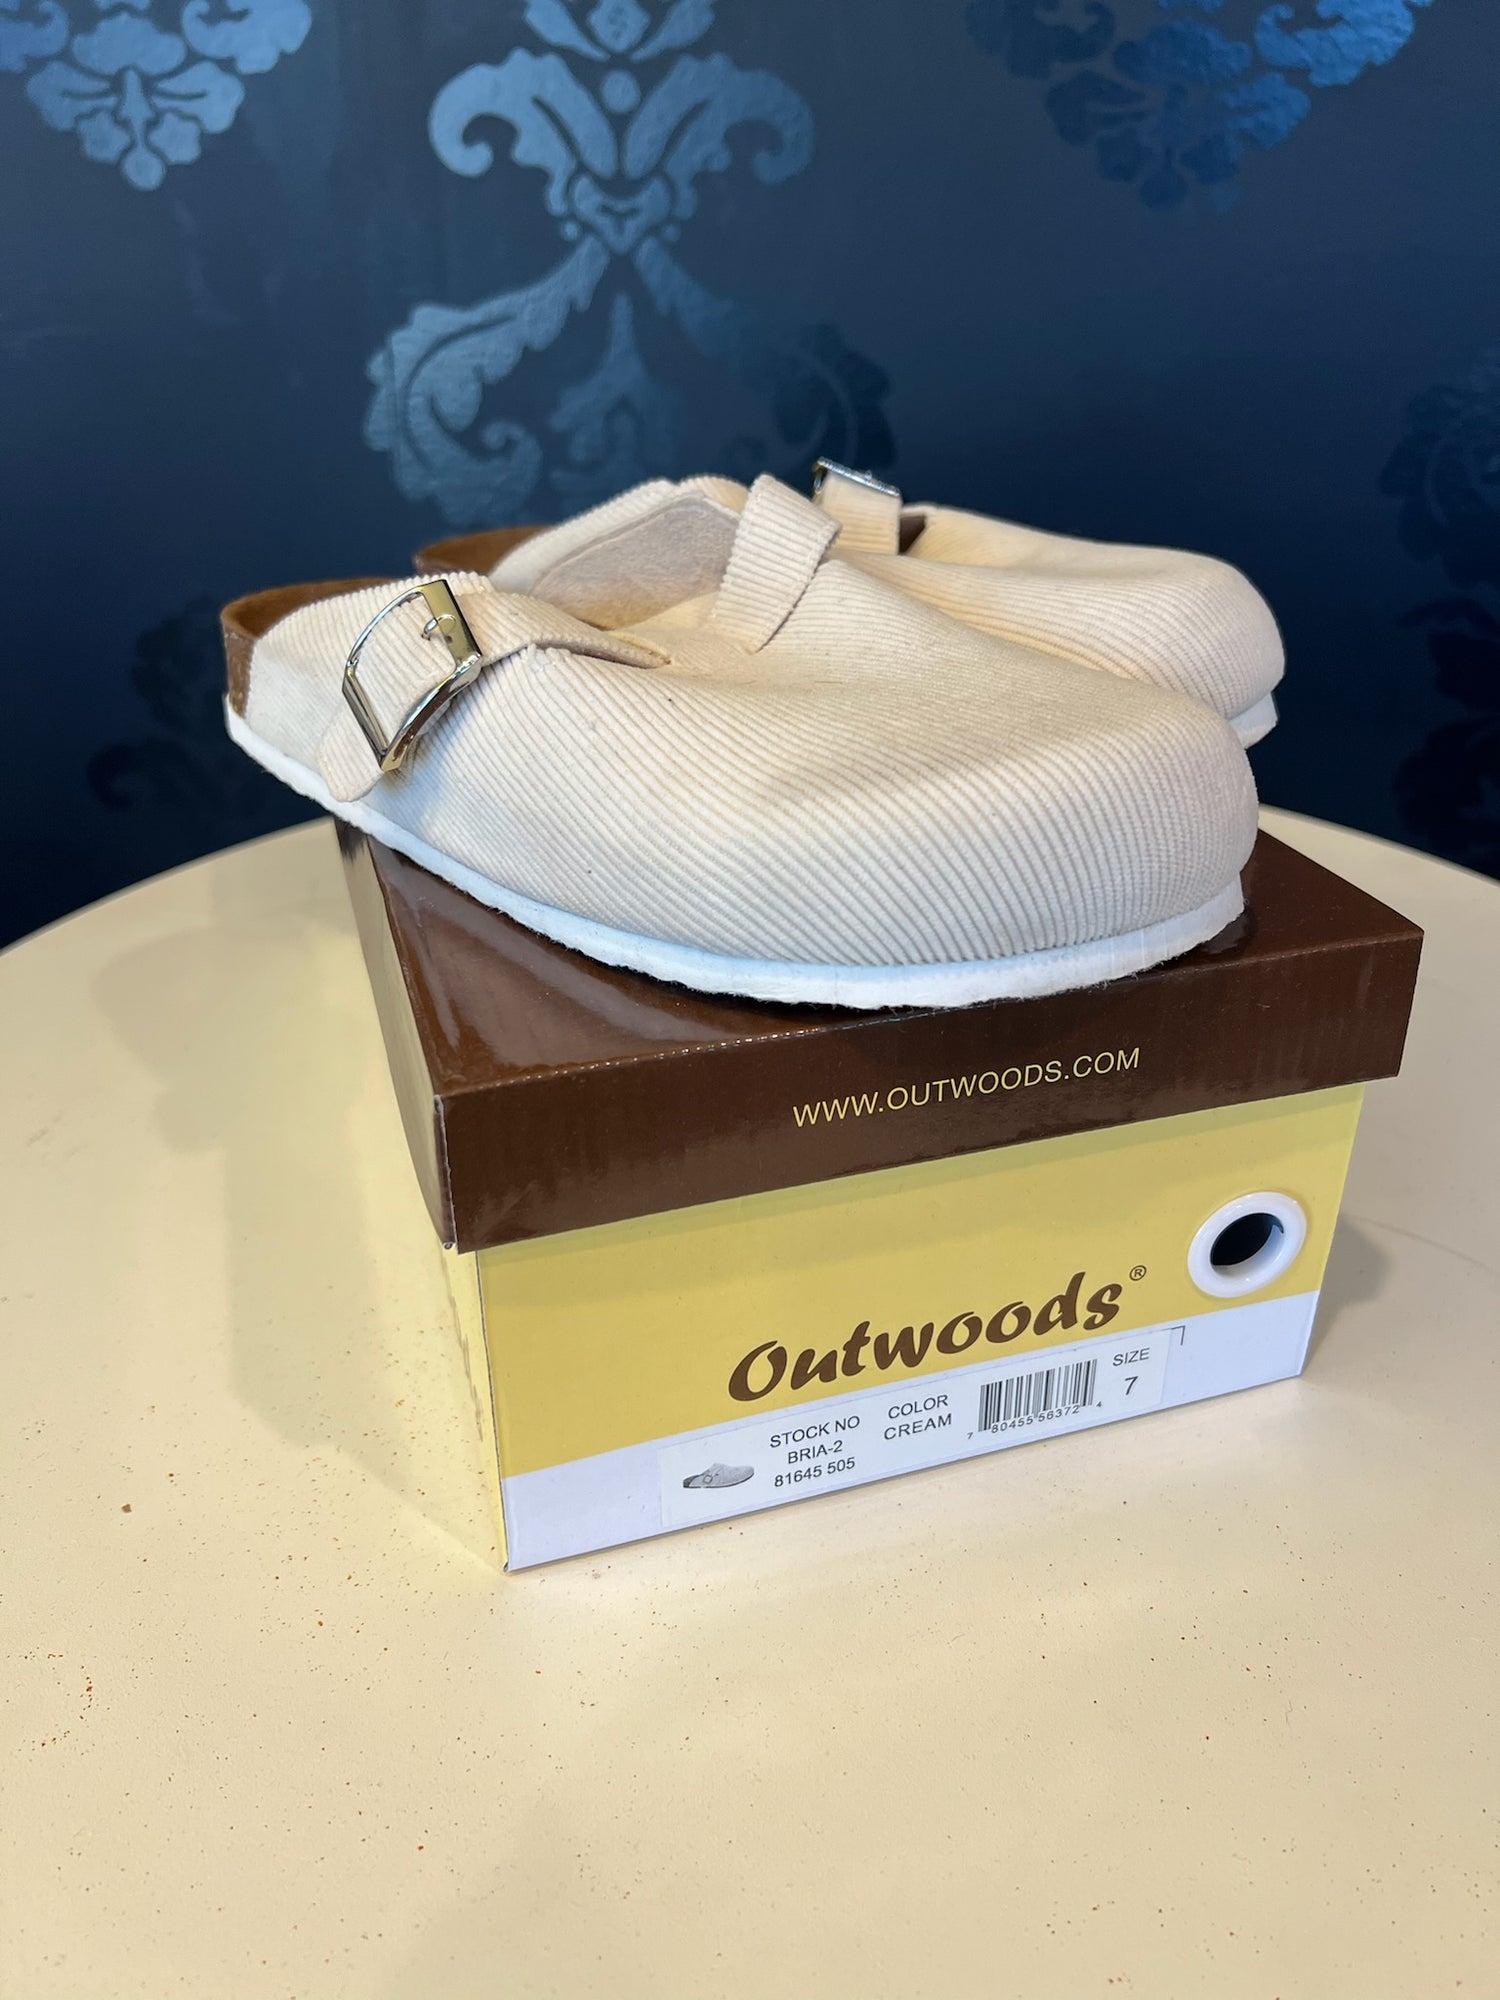 Outwoods Corduroy Cream Slide On Shoes Size 7